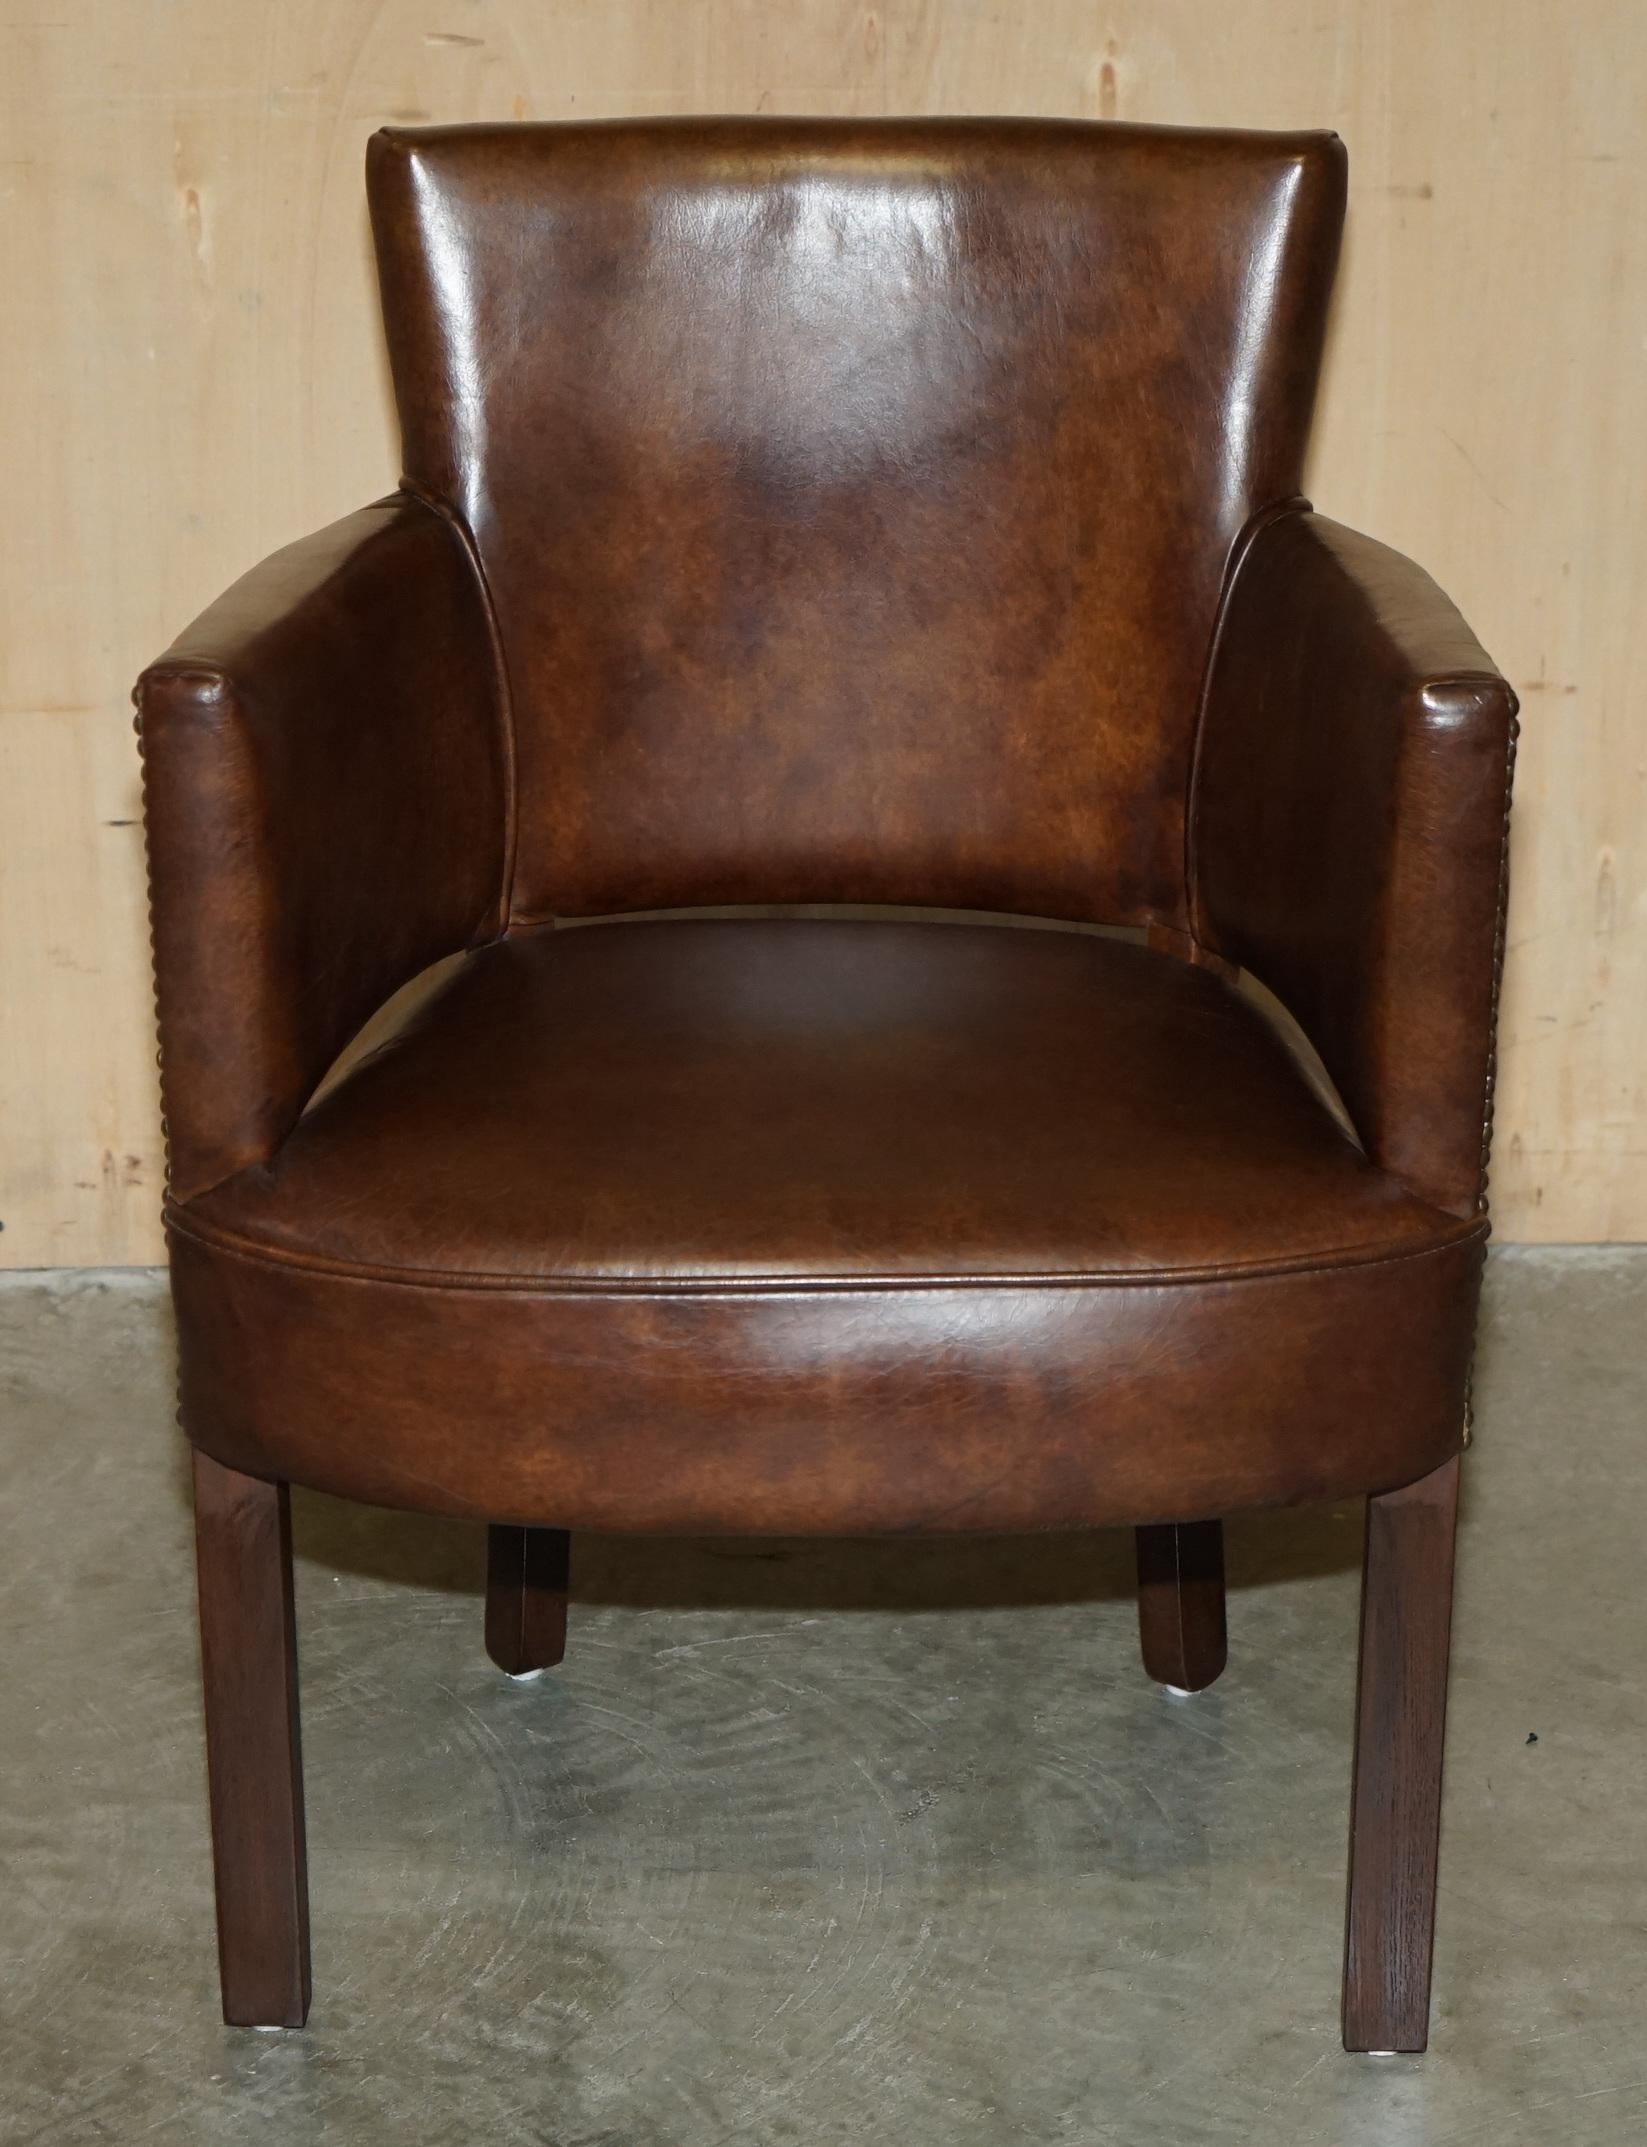 Regency FINE PAIR OF ViNTAGE HALO HERITAGE BROWN LEATHER OCCASIONAL OR DINING CHAIRS